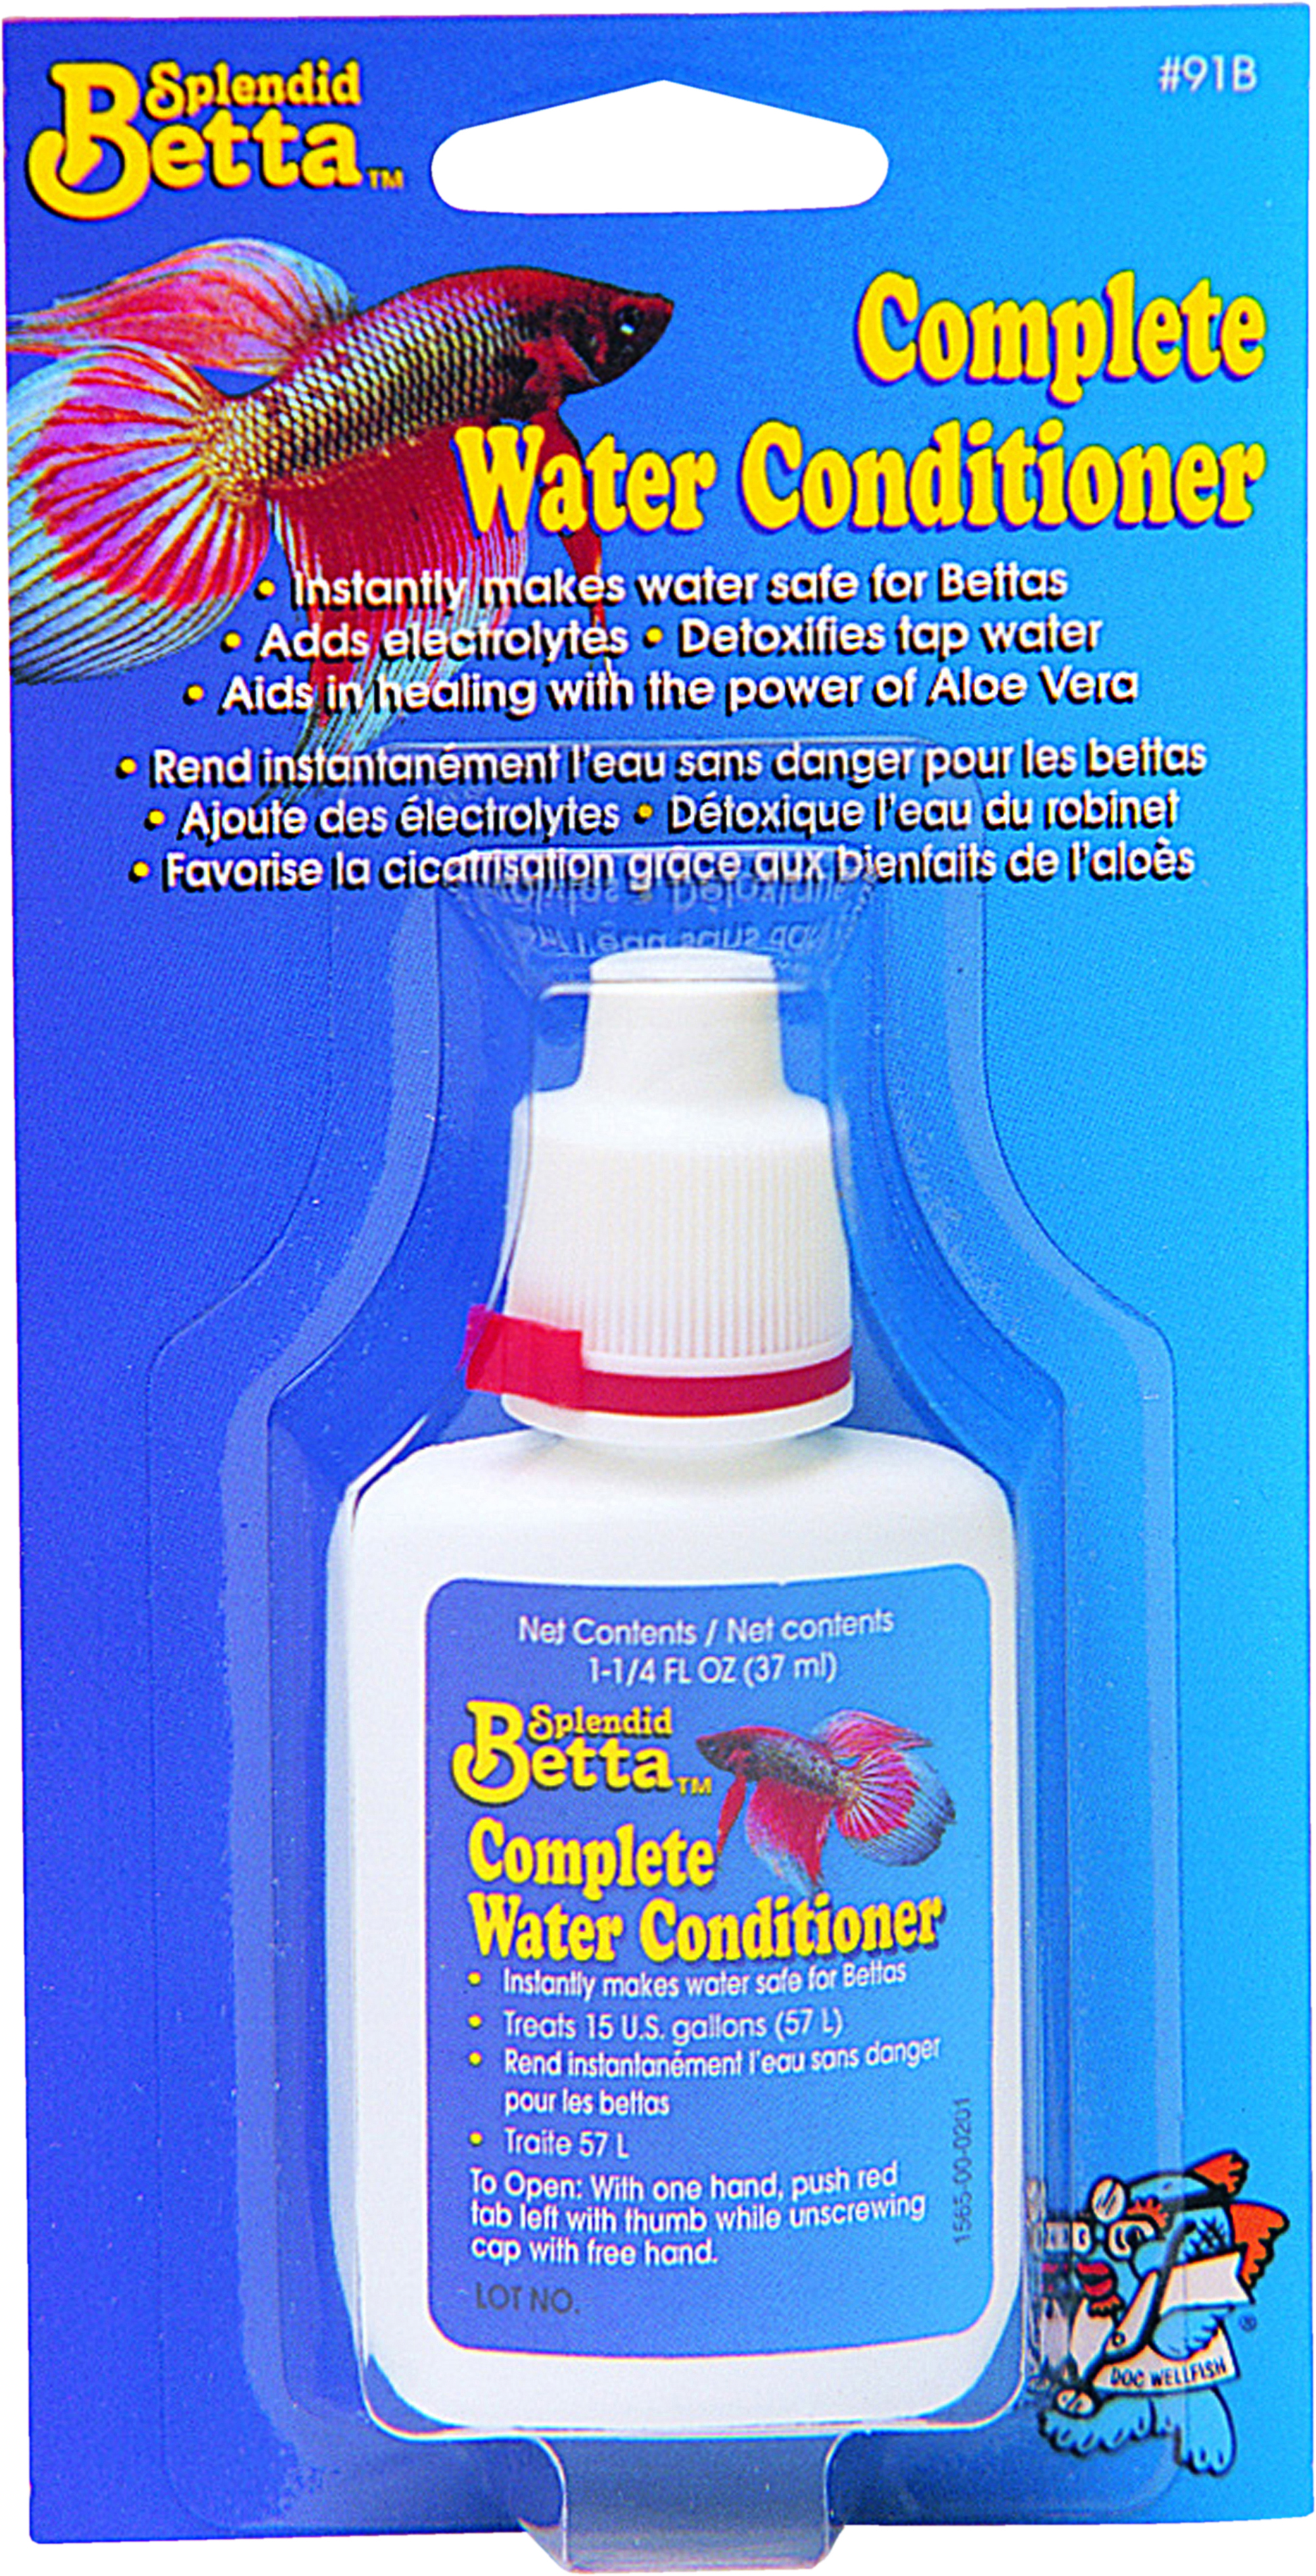 COMPLETE WATER CONDITIONER